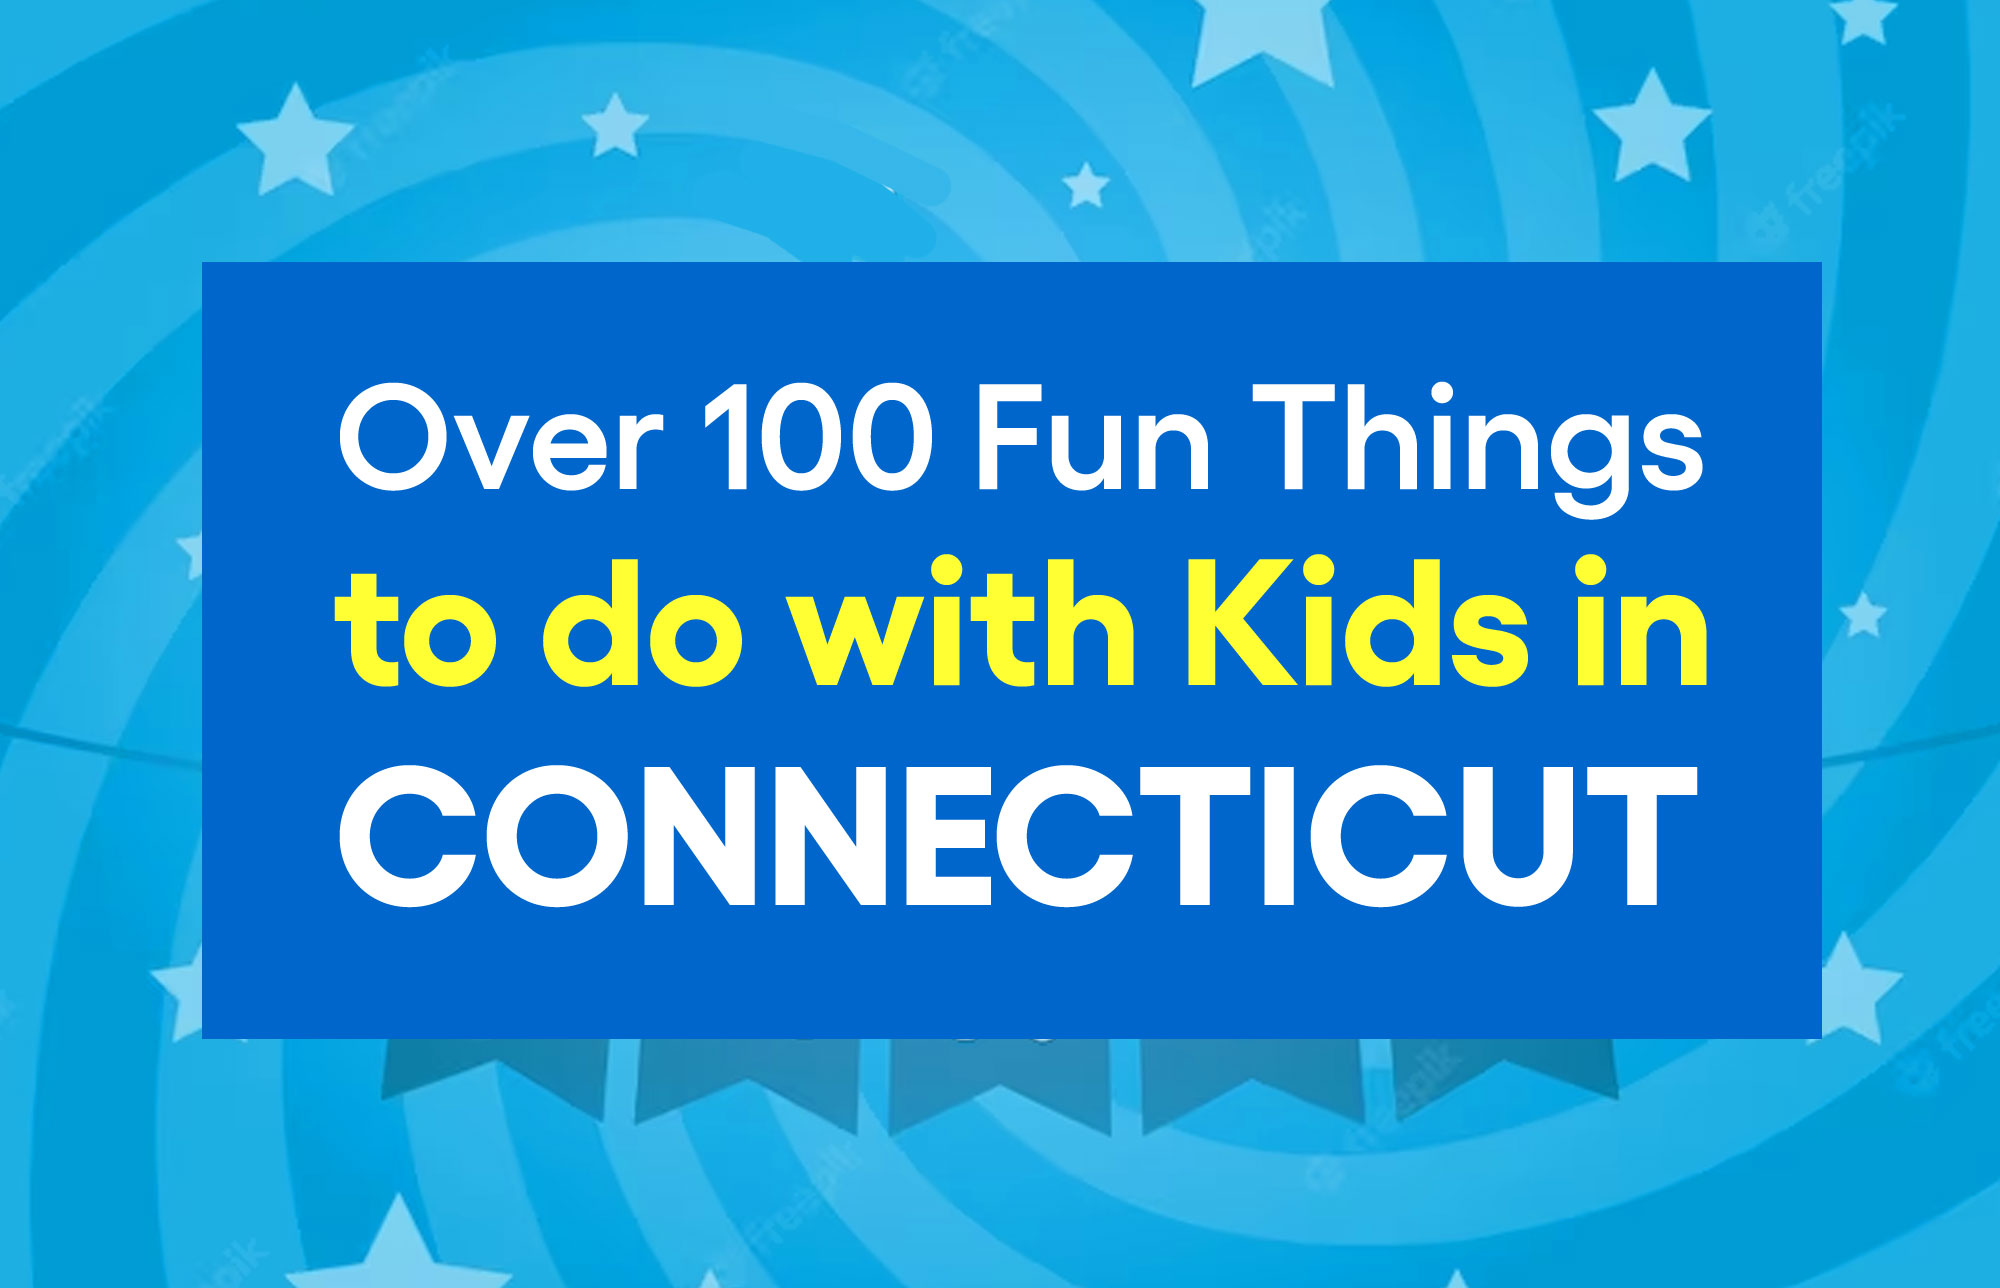 Over 100 Fun Things to Do with Kids in Connecticut